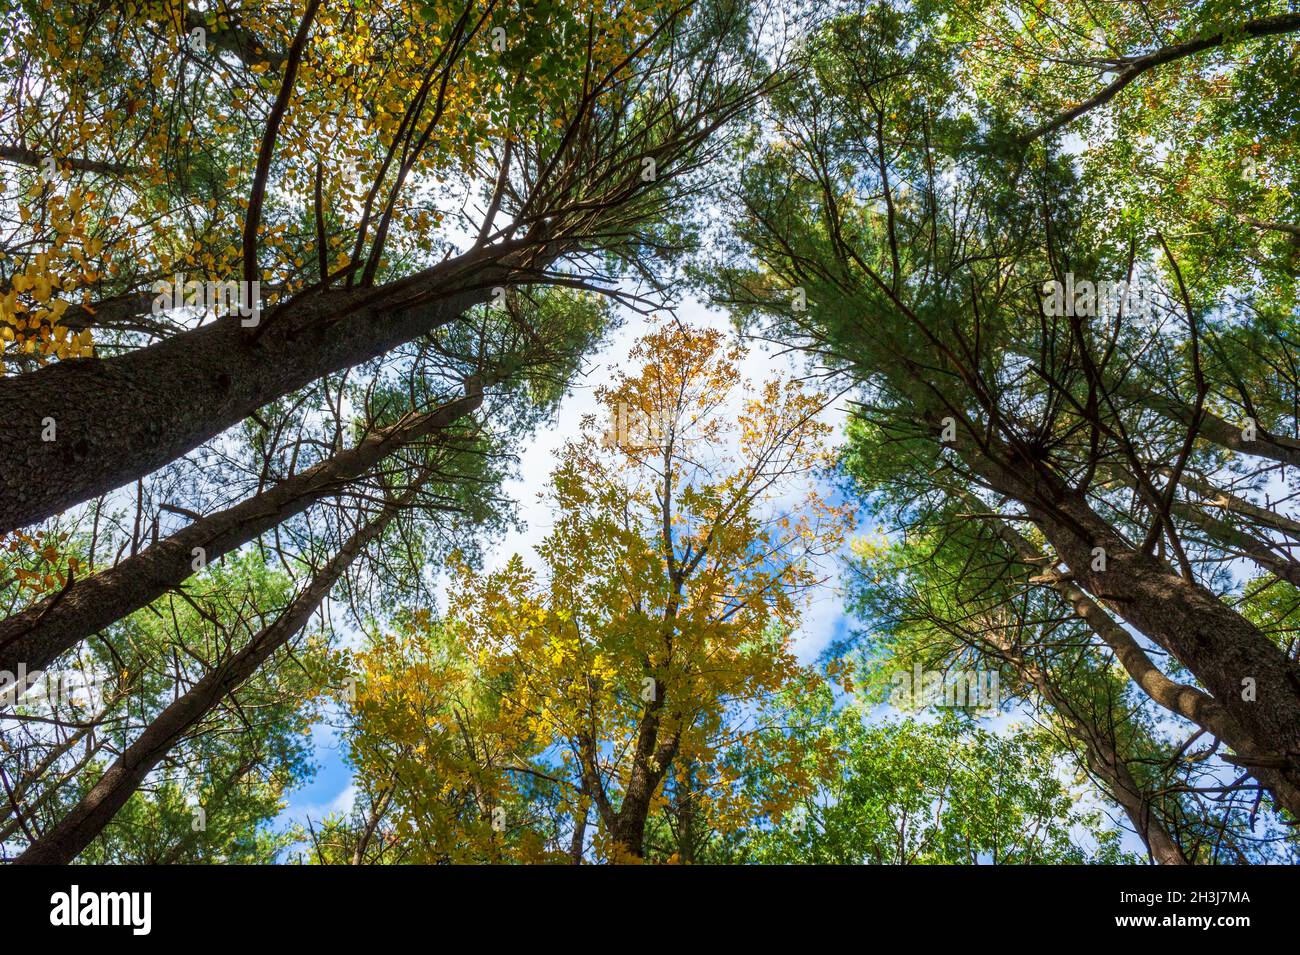 The canopy of an oak-hickory forest, with white pine trees mixed in. Foliage in fall colors. Moore State Park, Paxton, MA, US Stock Photo